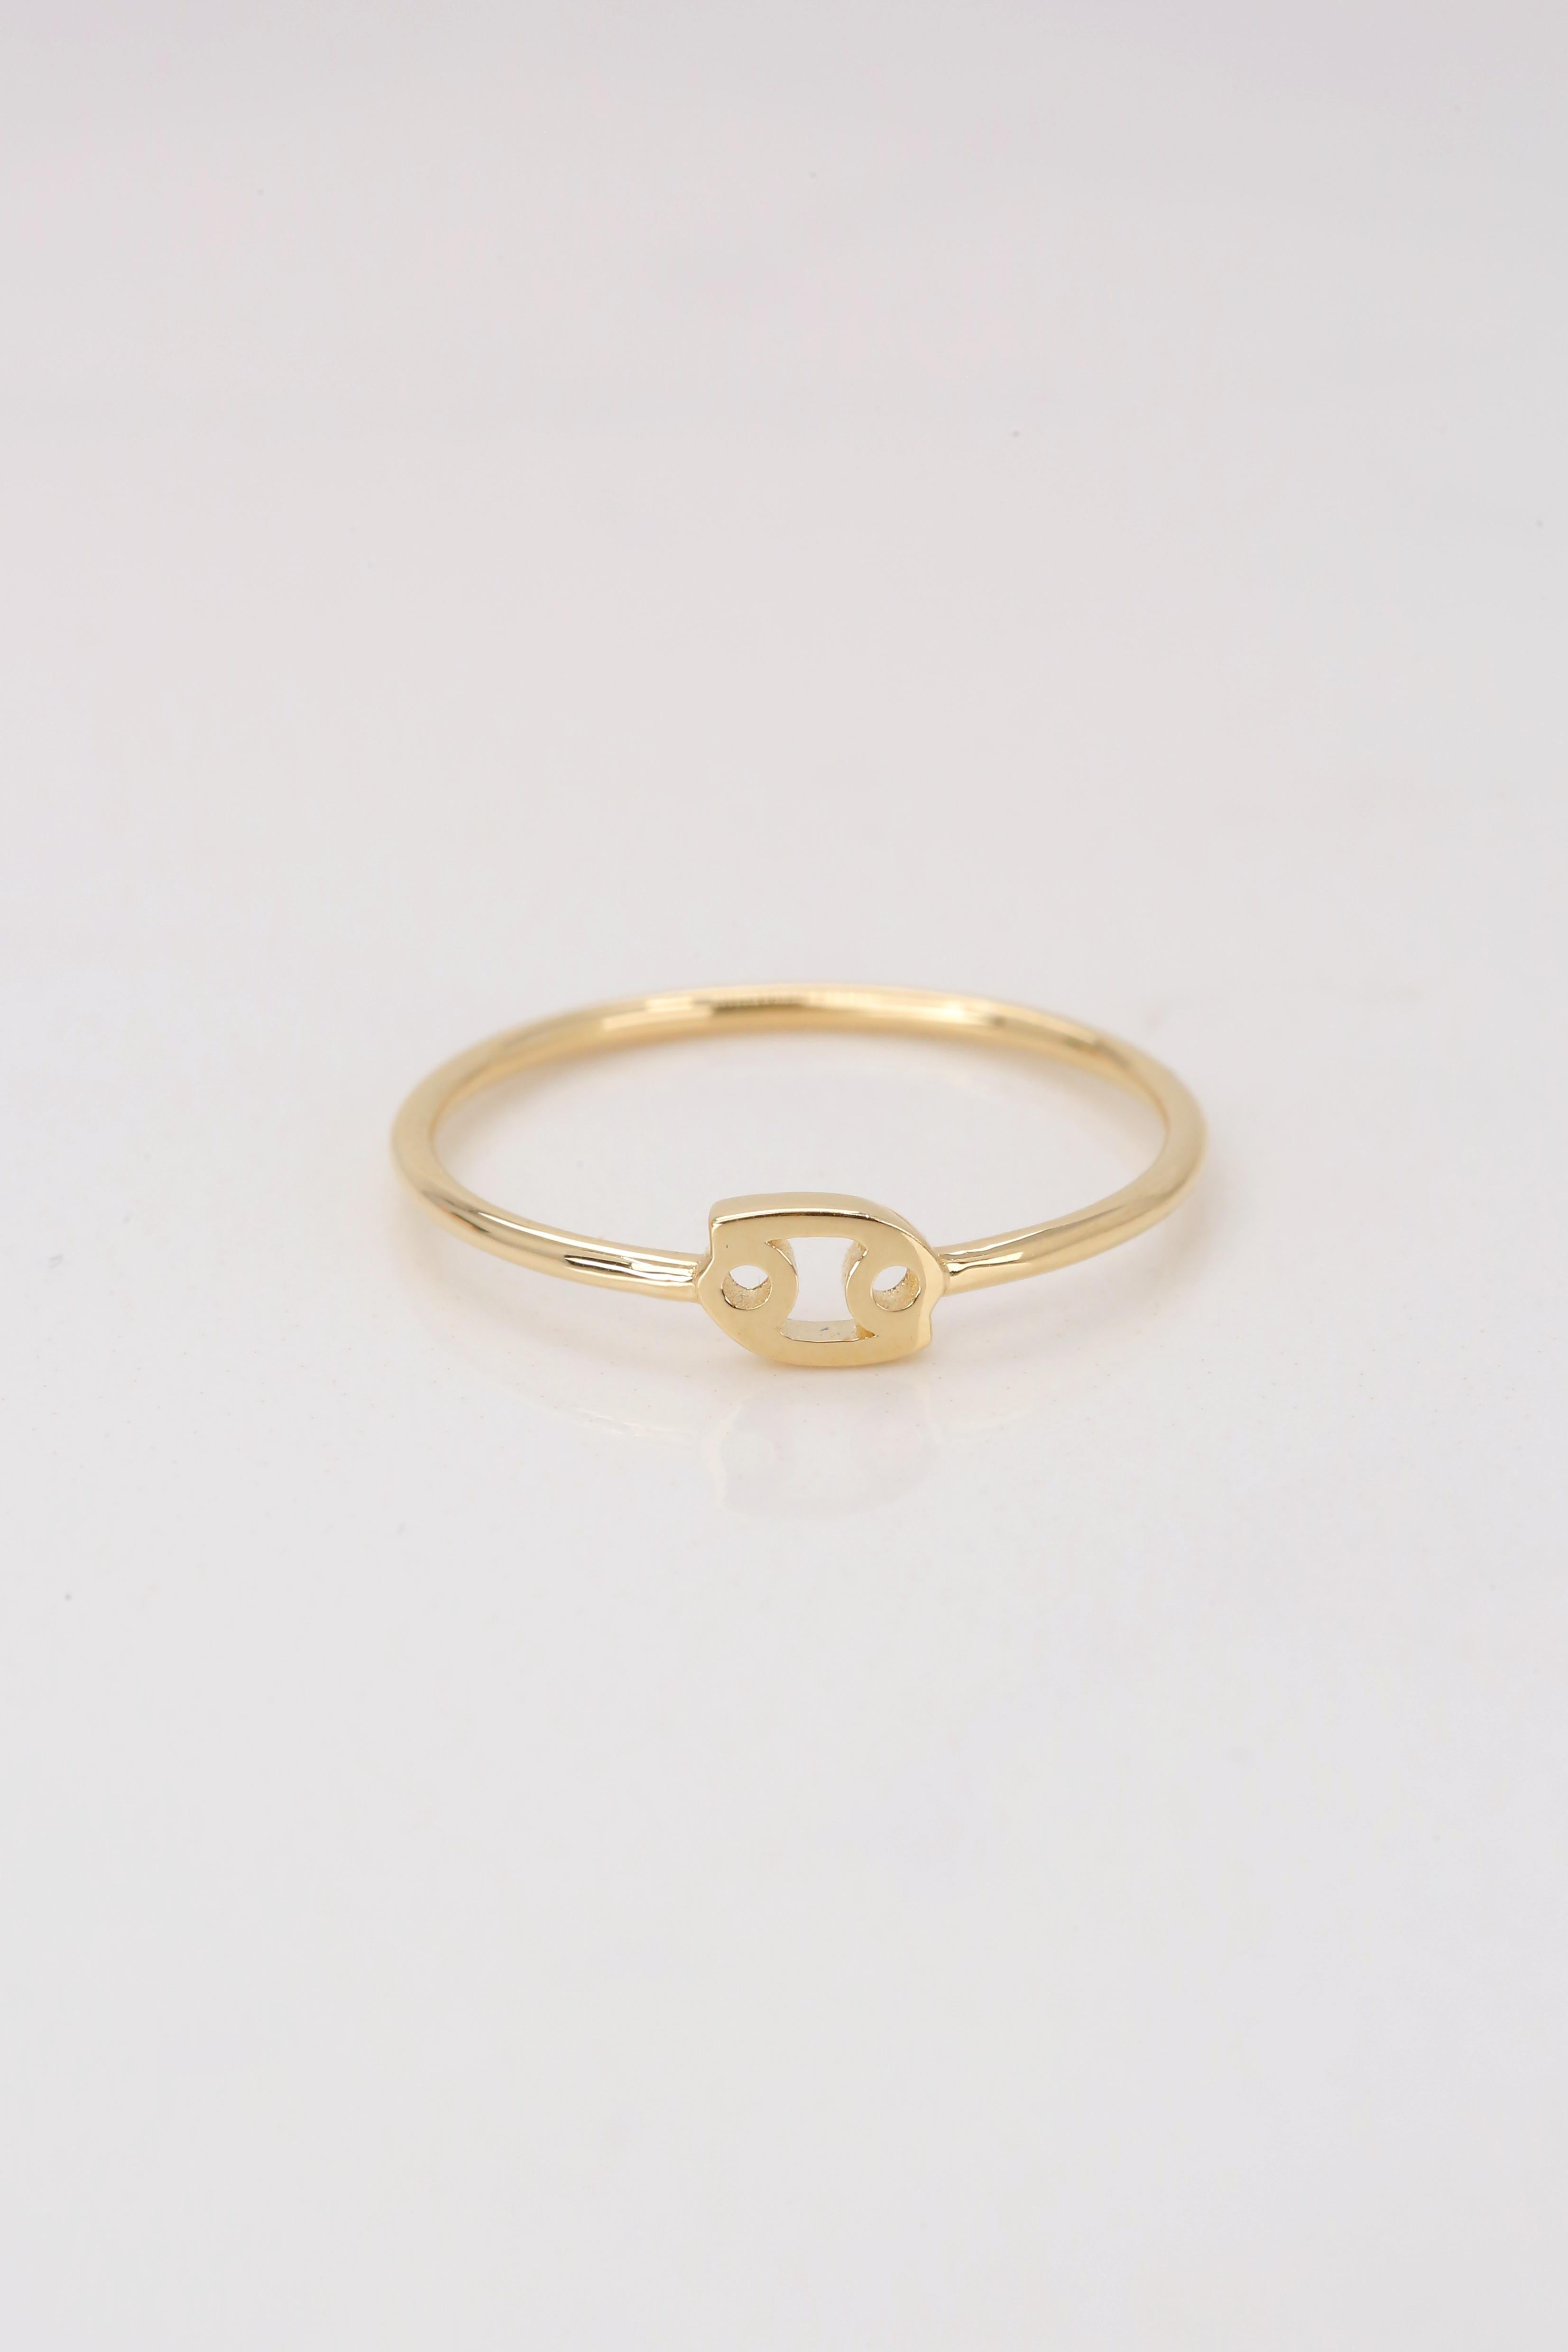 For Sale:  14K Gold Cancer Zodiac Ring, Cancer Sign Zodiac Ring 6